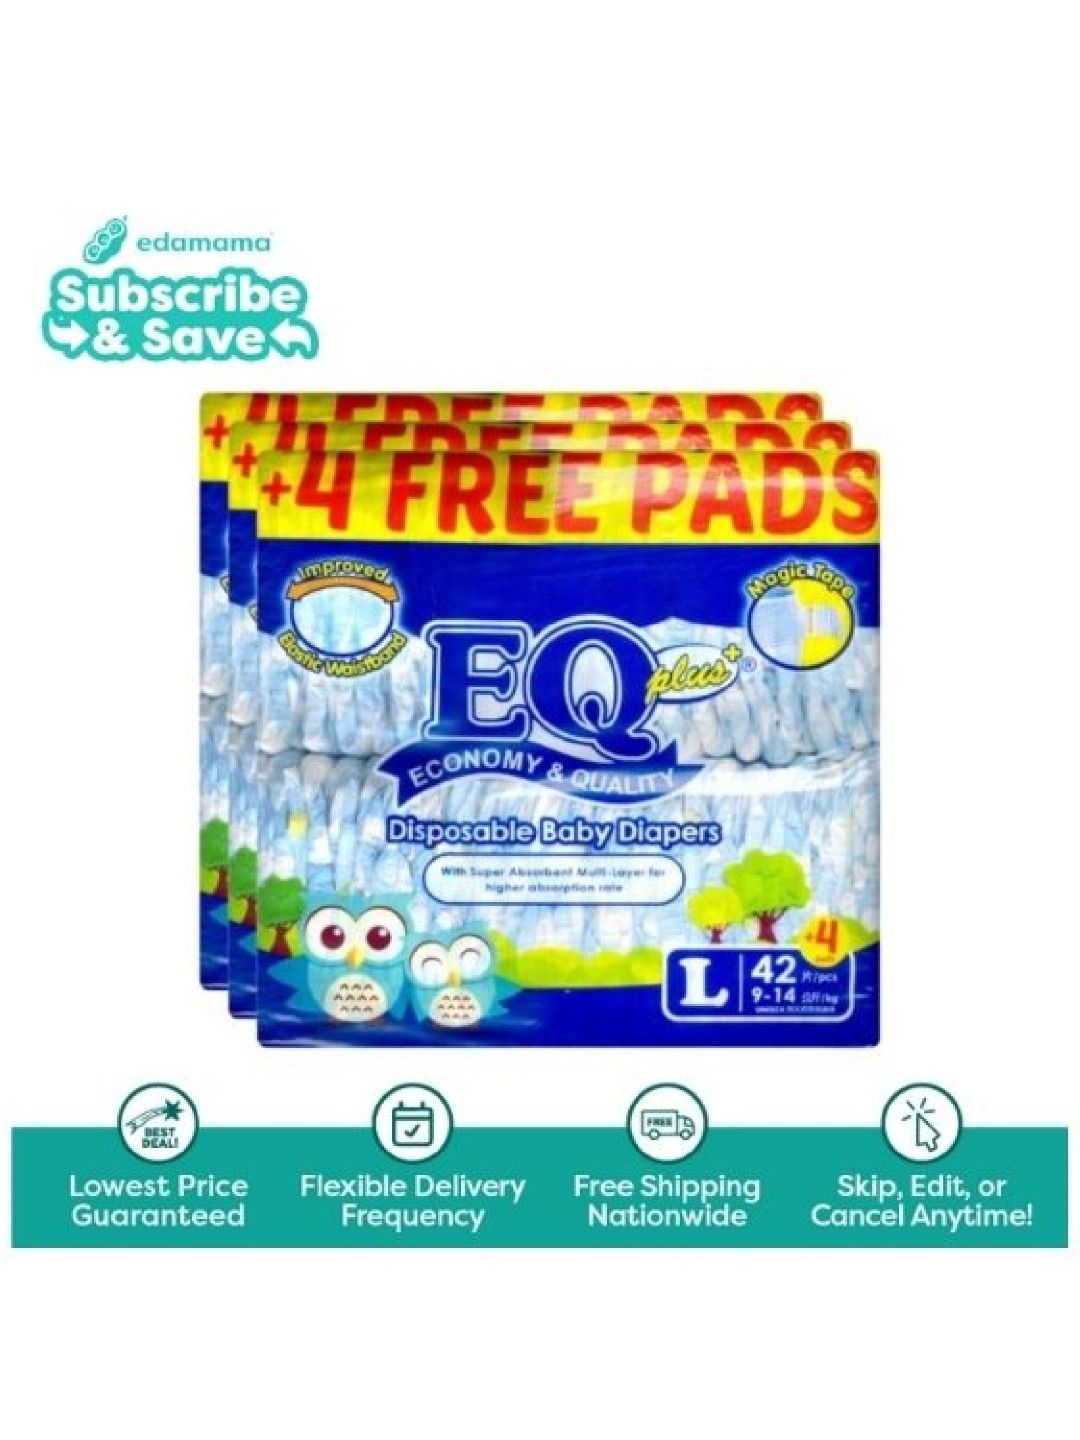 EQ Diapers and Wipes Plus Jumbo Pack Tape Diaper Large (42 pcs x 3 pack) - Subscription (No Color- Image 1)